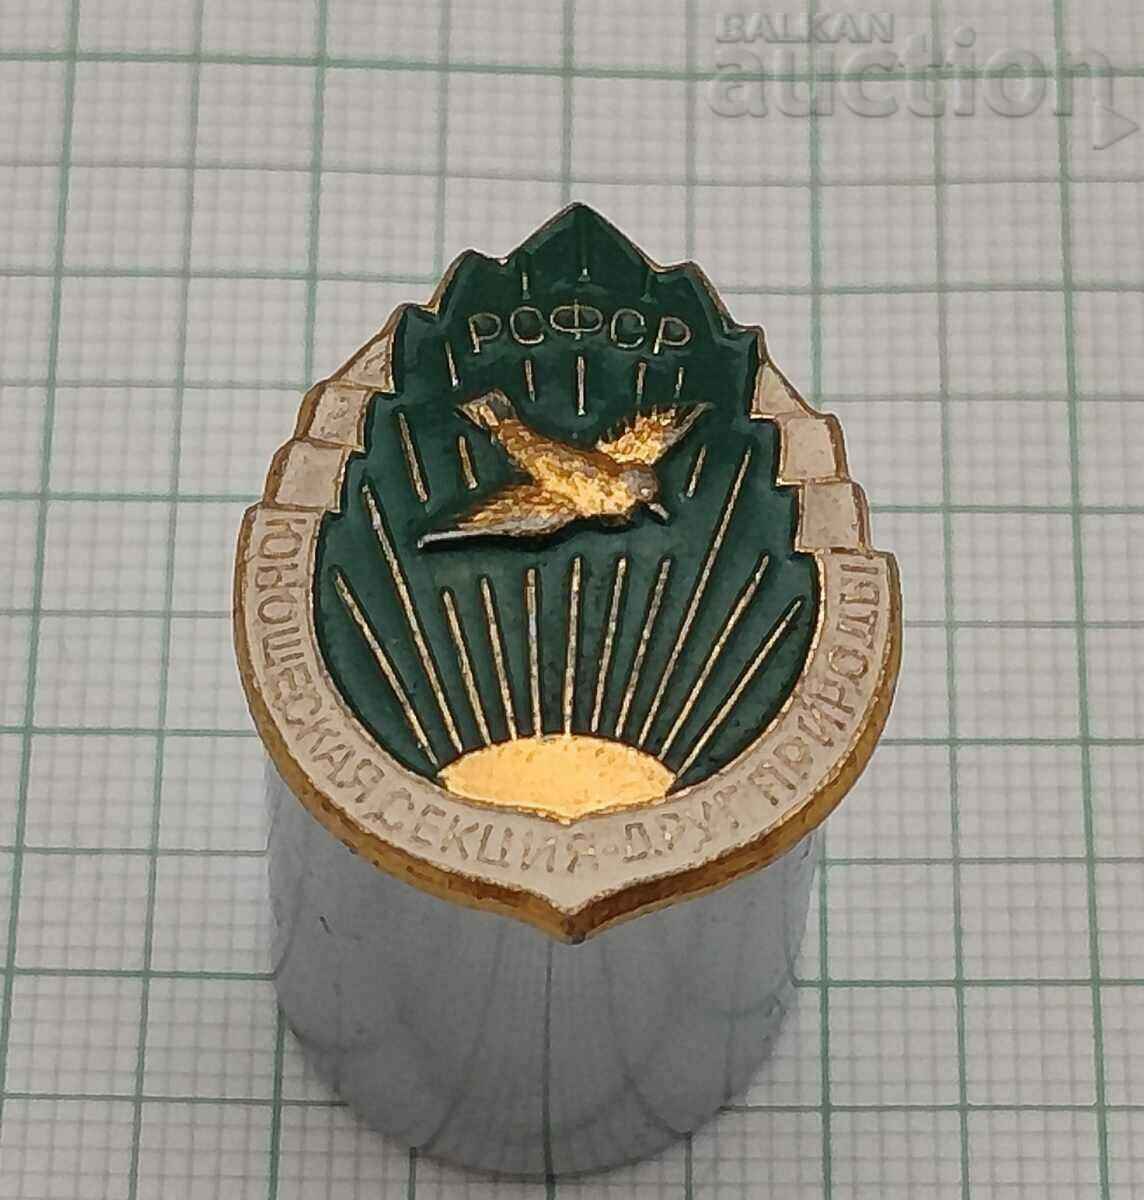 YOUNG FRIEND OF NATURE RSFSR BADGE